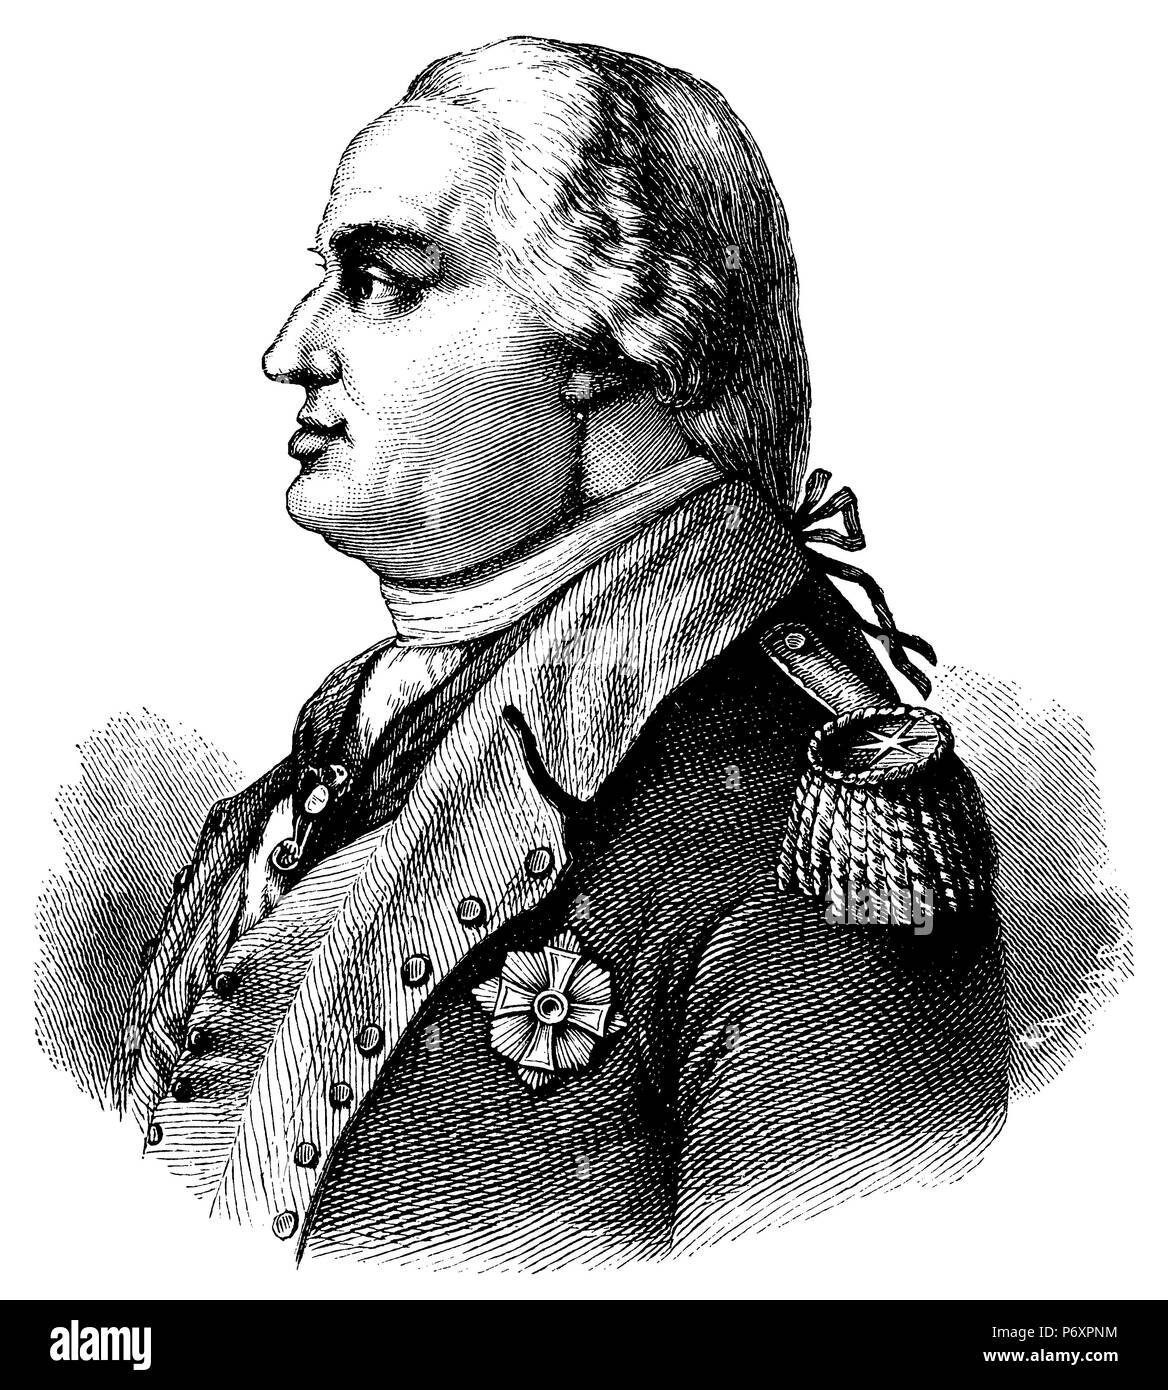 Steuben, Friedrich Wilhelm von (1730-1794), also known as Baron Steuben, Prussian officer and US General, organizer of the Continental Army in the American Revolutionary War,   1899 Stock Photo